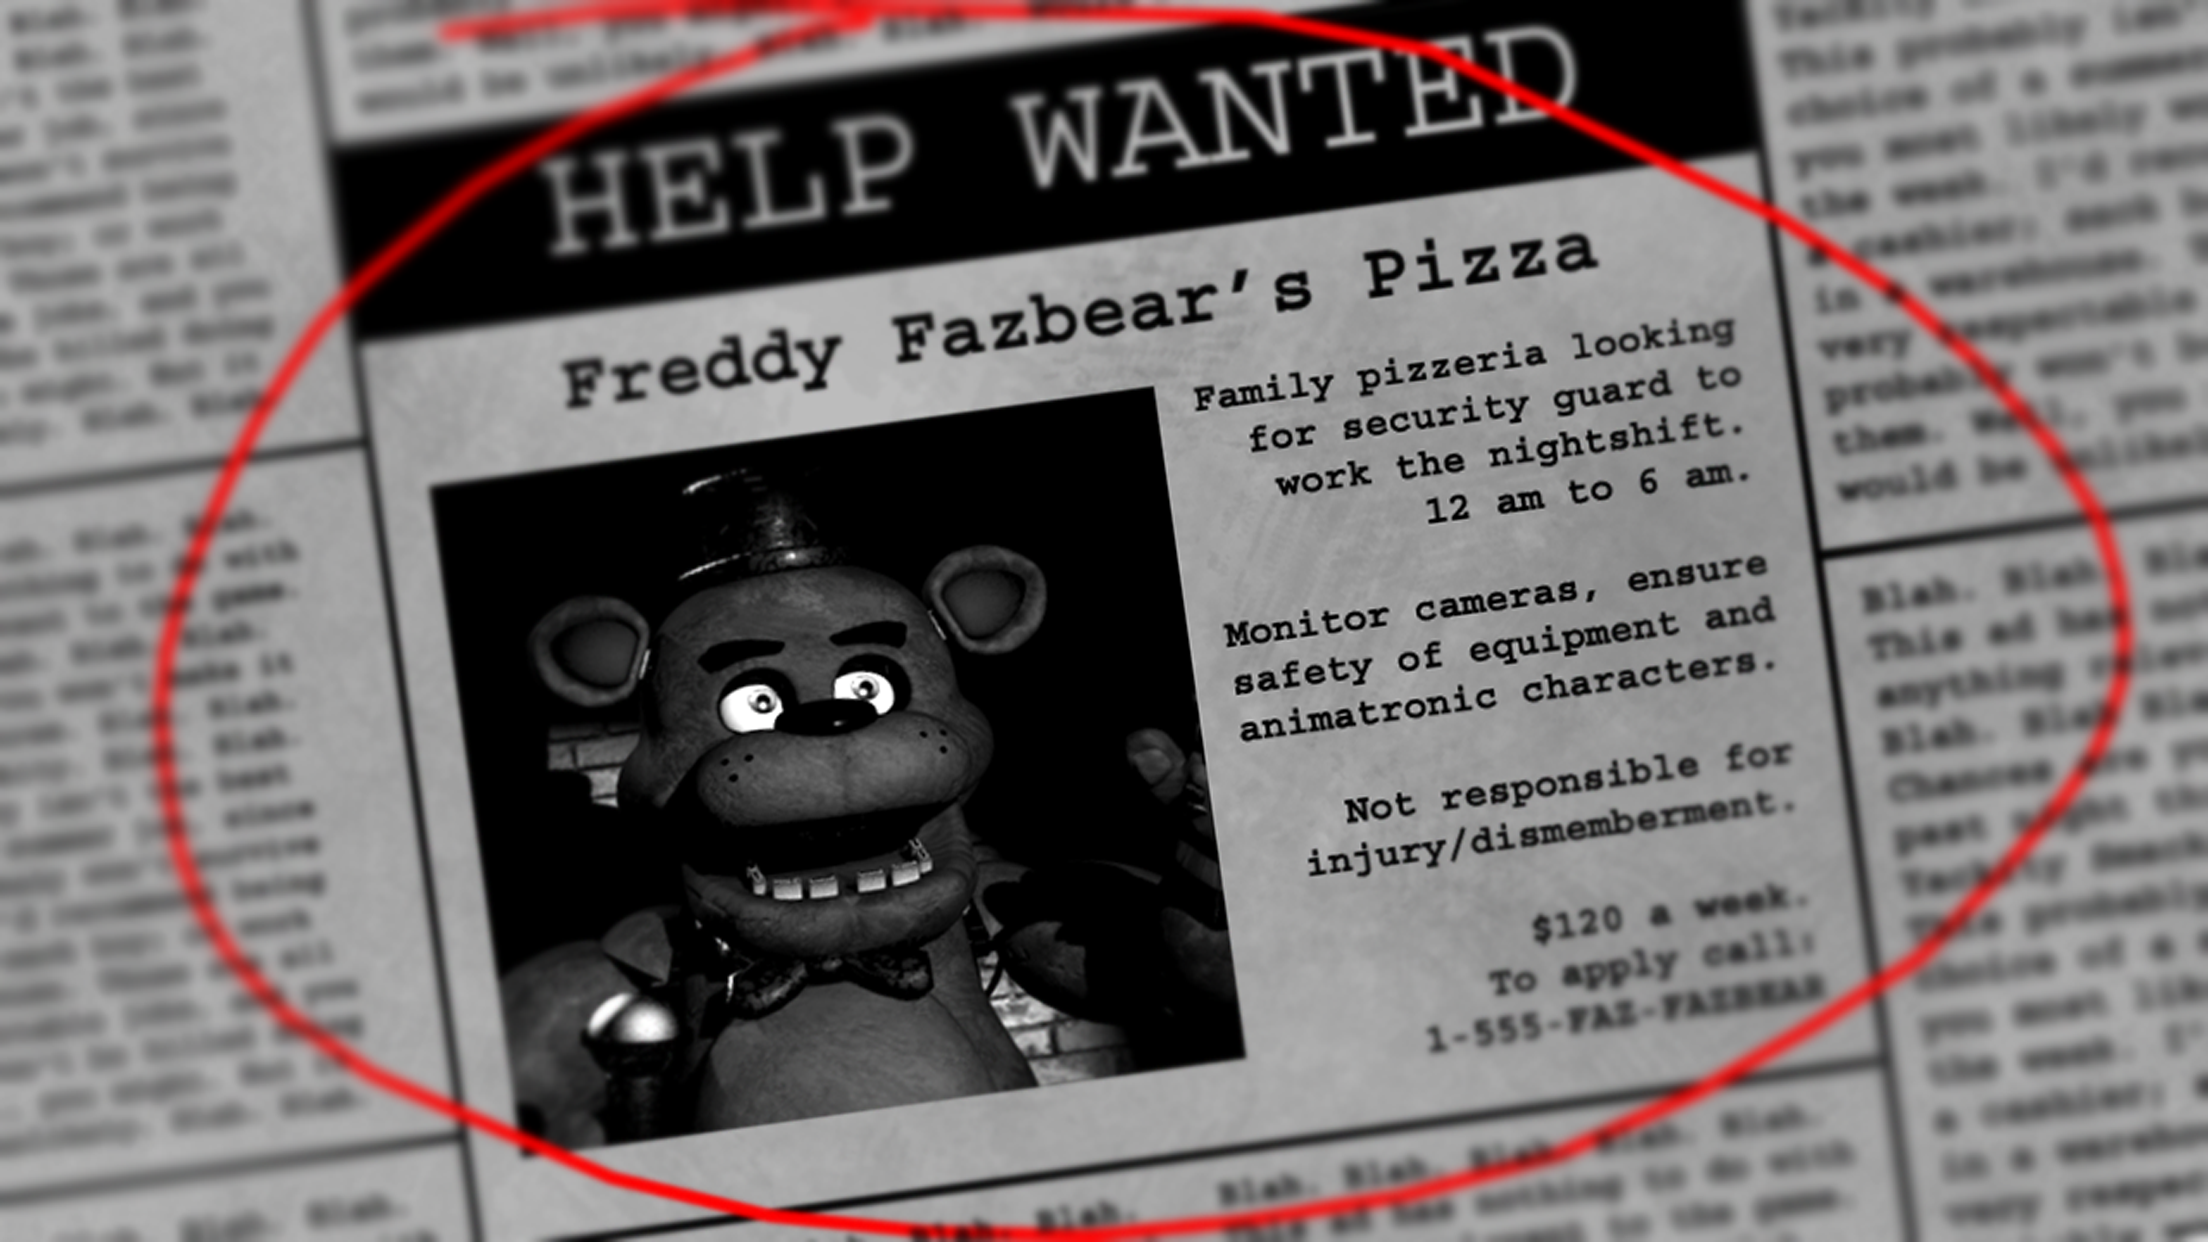 Five Nights at Freddy's 4 APK Download for Android Free